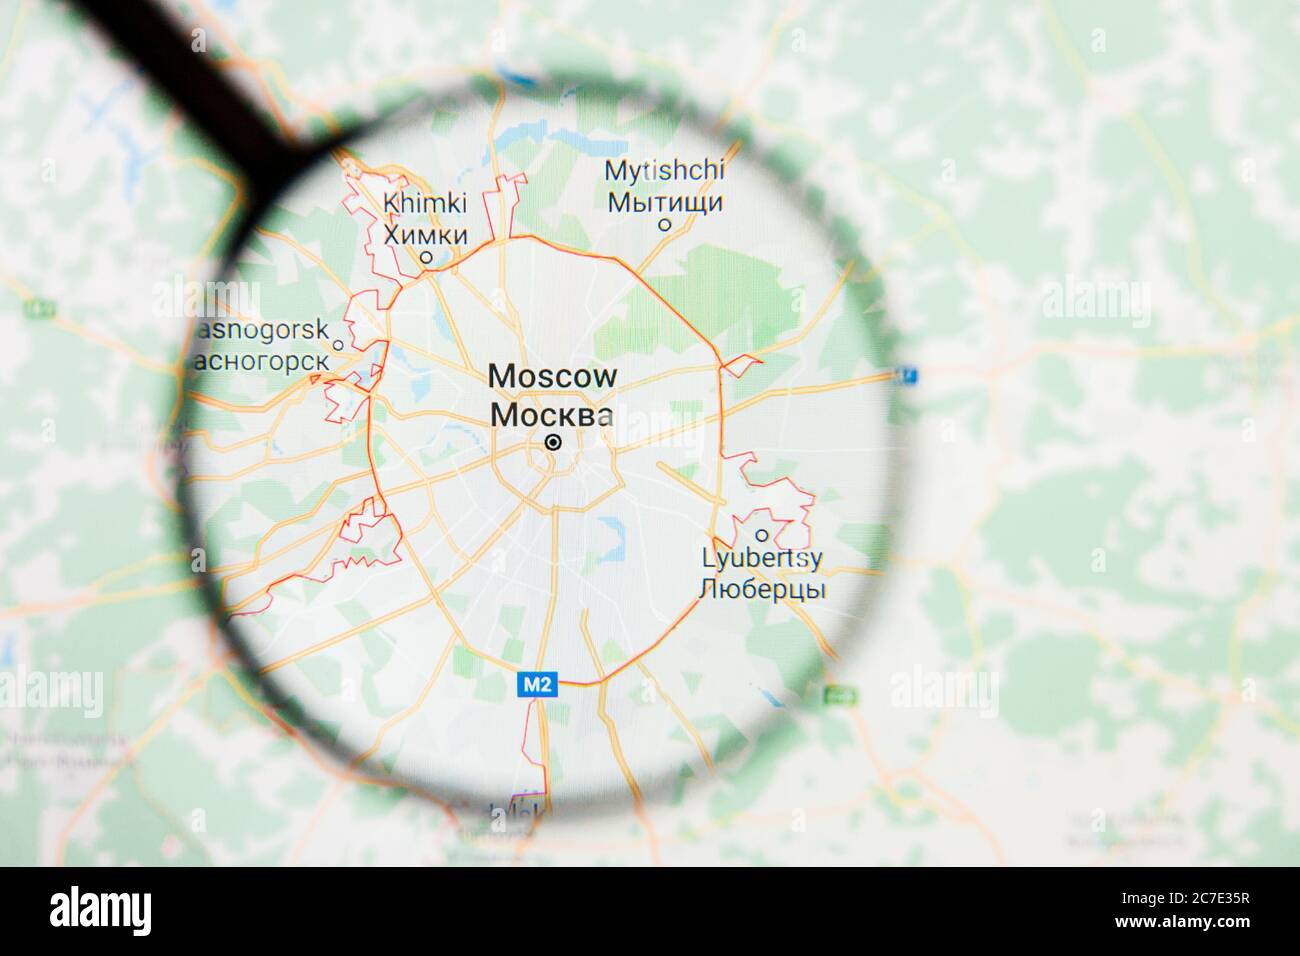 Moscow, Russia city visualization illustrative concept on display screen through magnifying glass Stock Photo